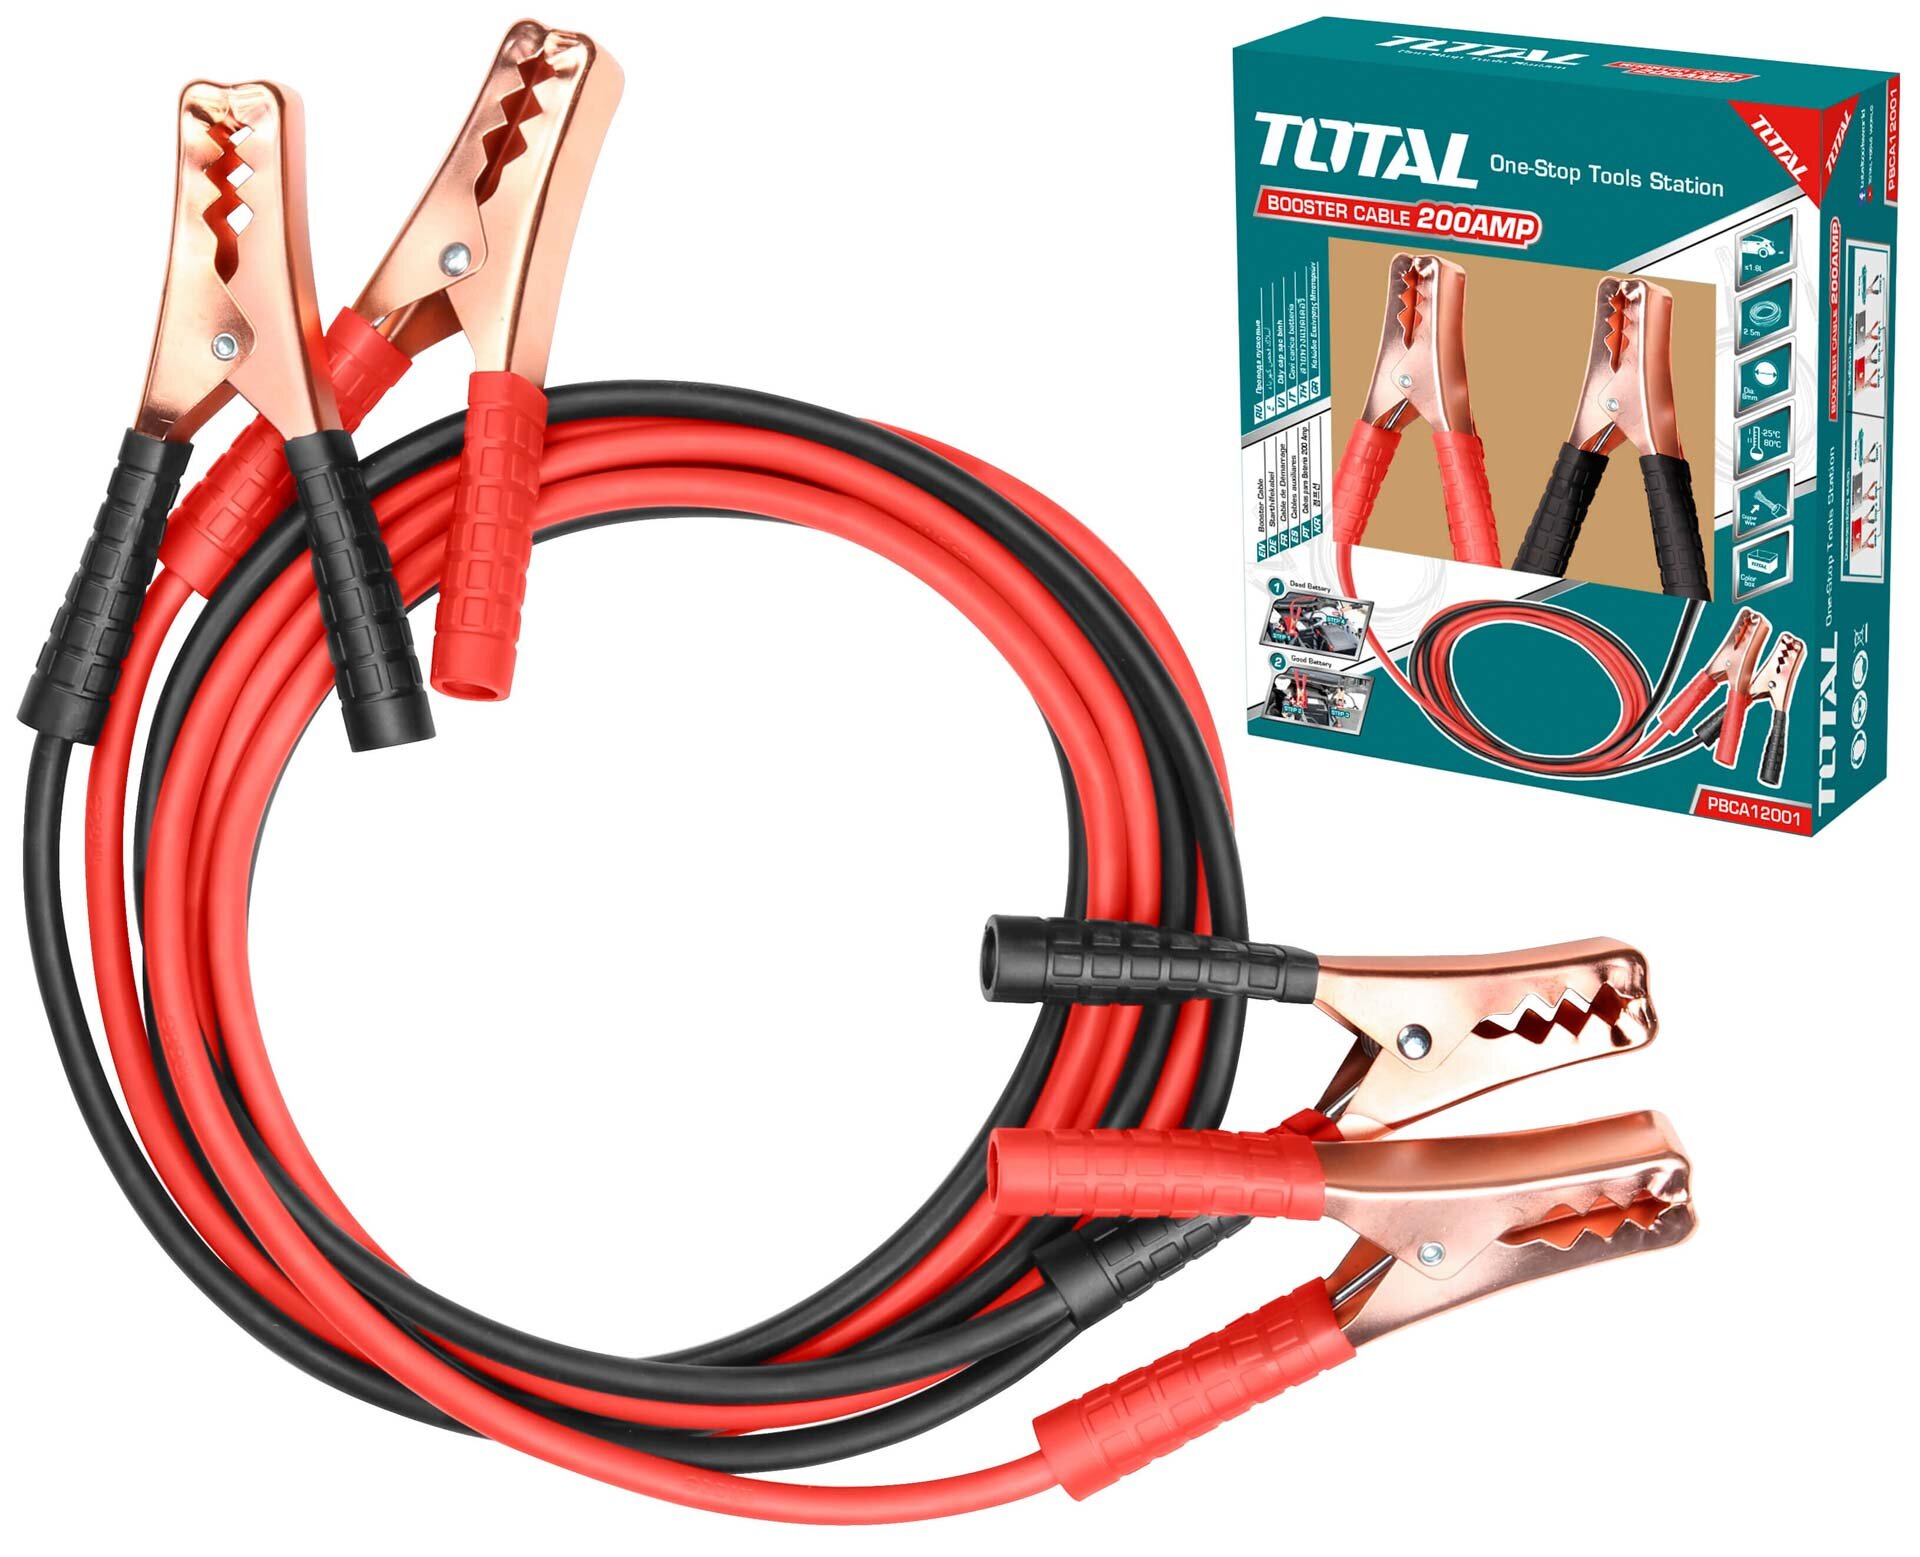 TOTAL BOOSTER CABLE 2.5m (PBCA12001)